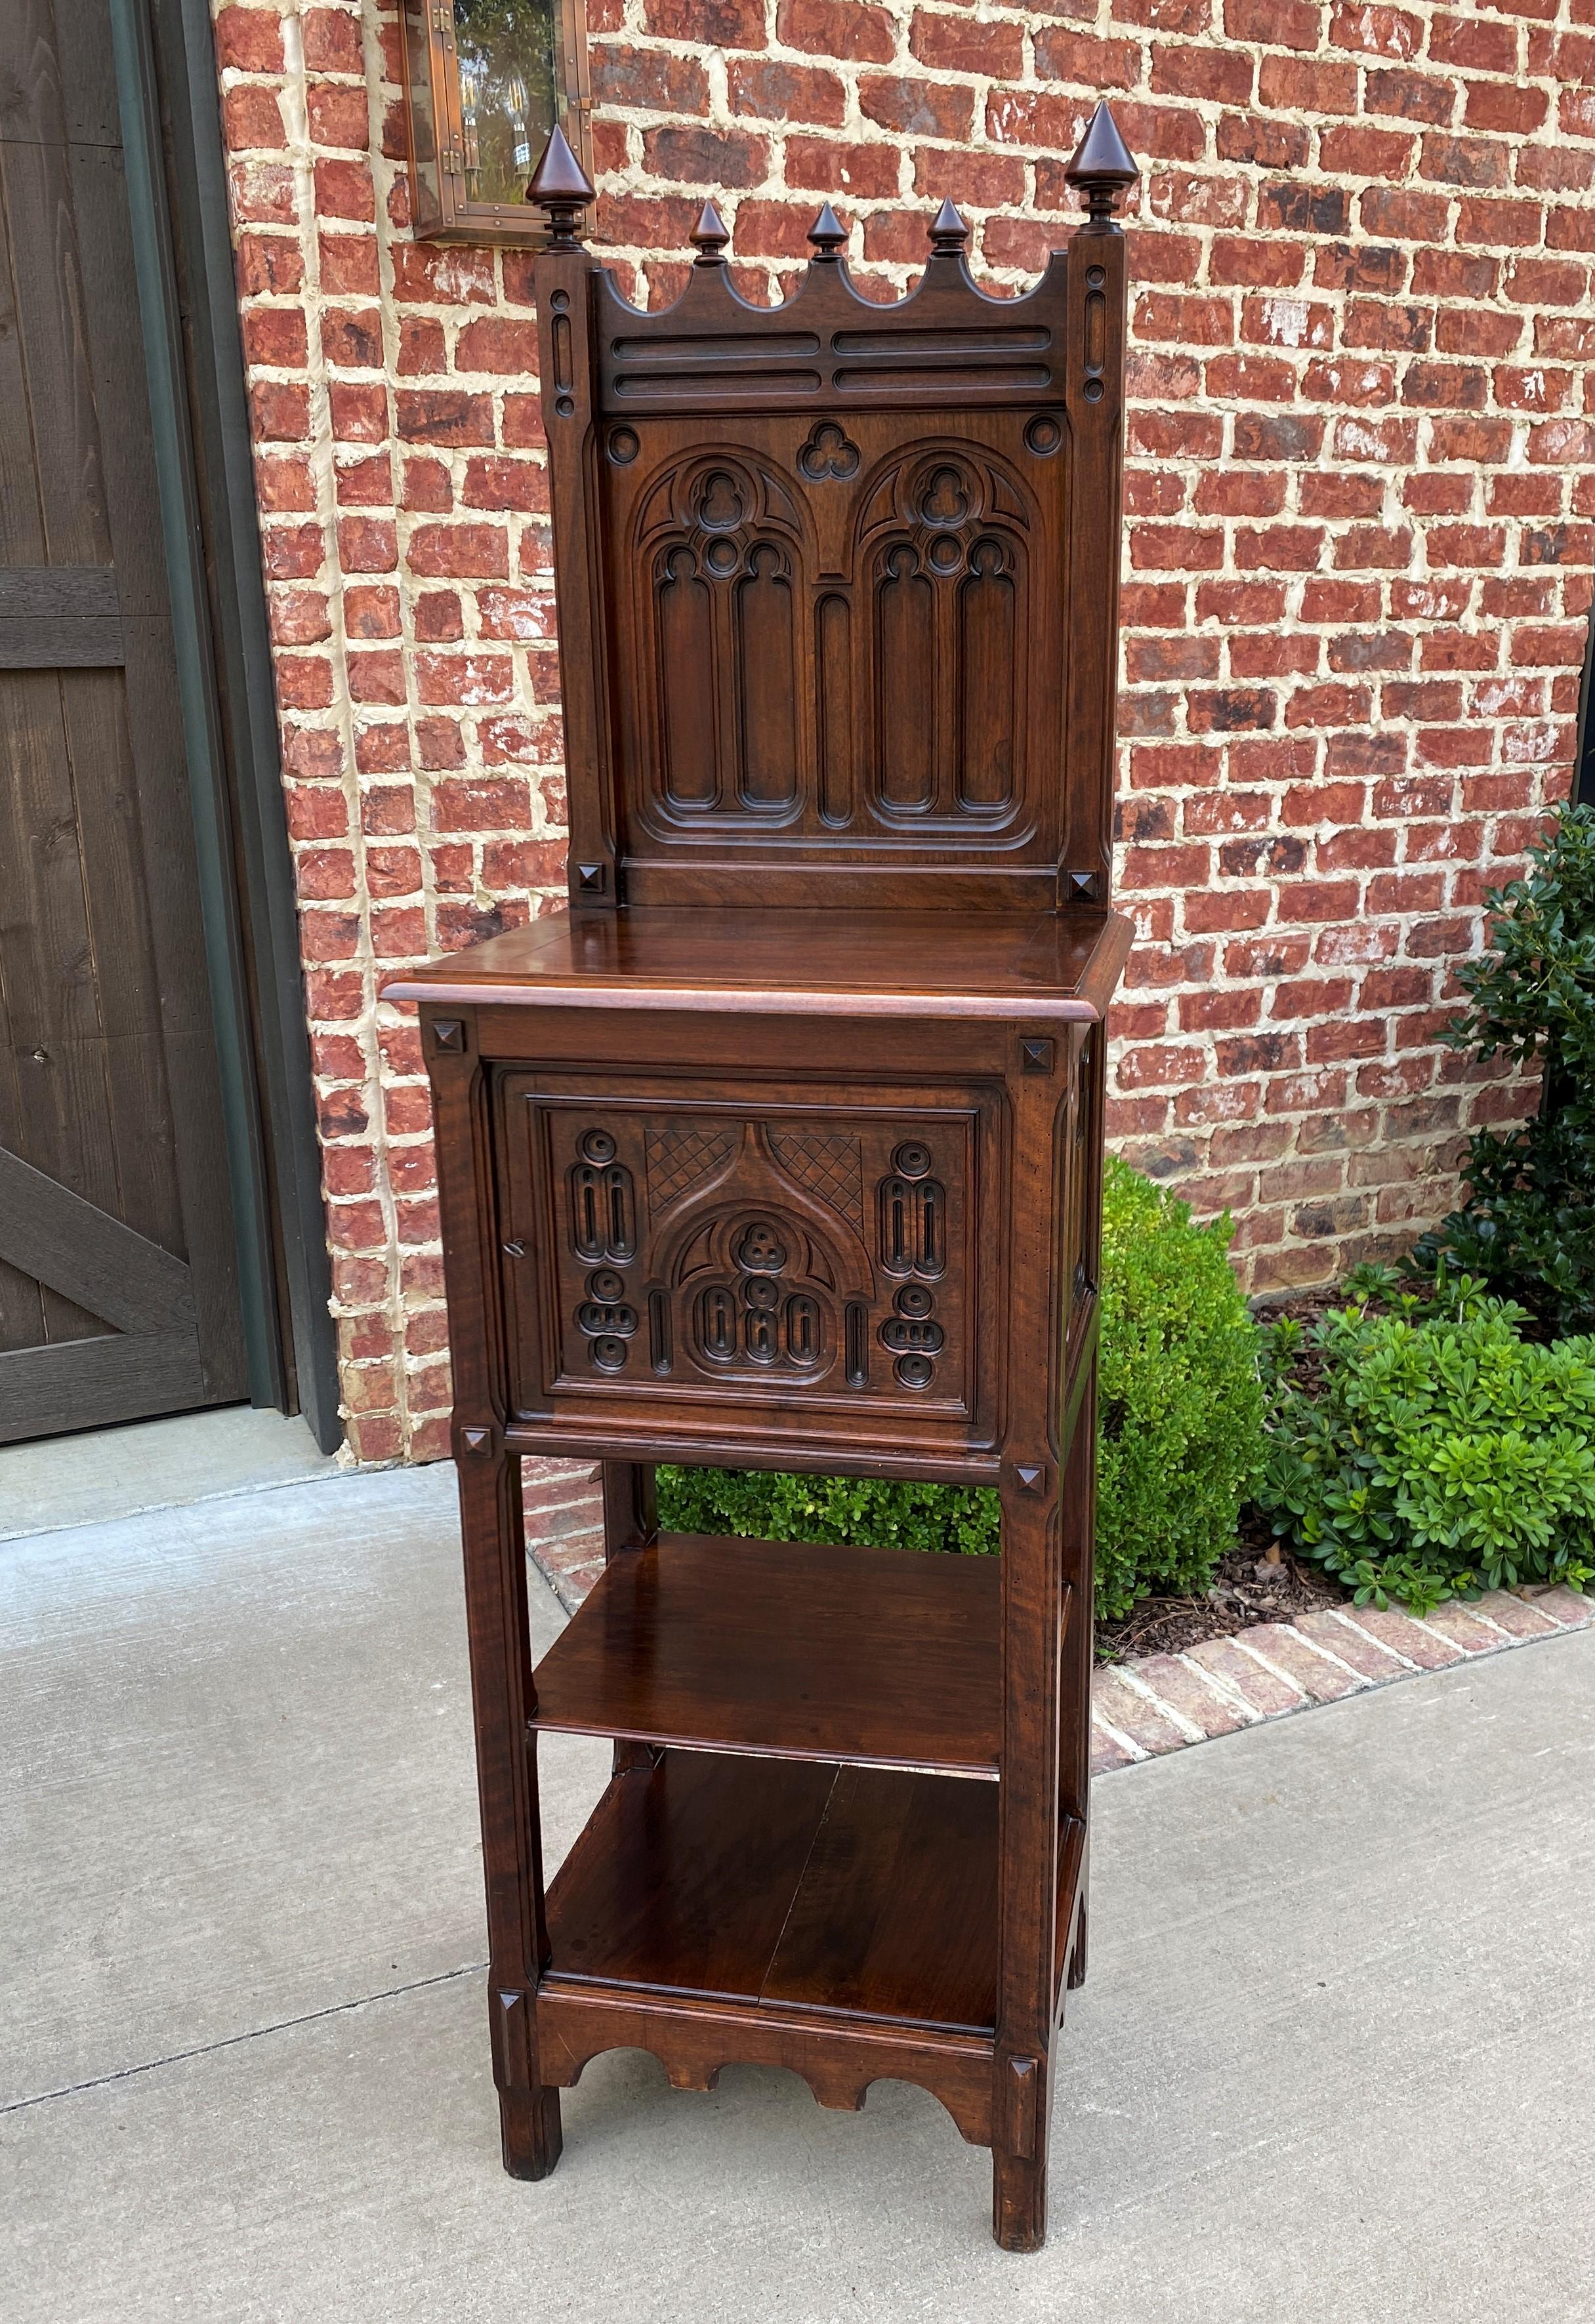 Antique French Cabinet Cupboard Pedestal Bookcase Bar Gothic Revival Petite 3